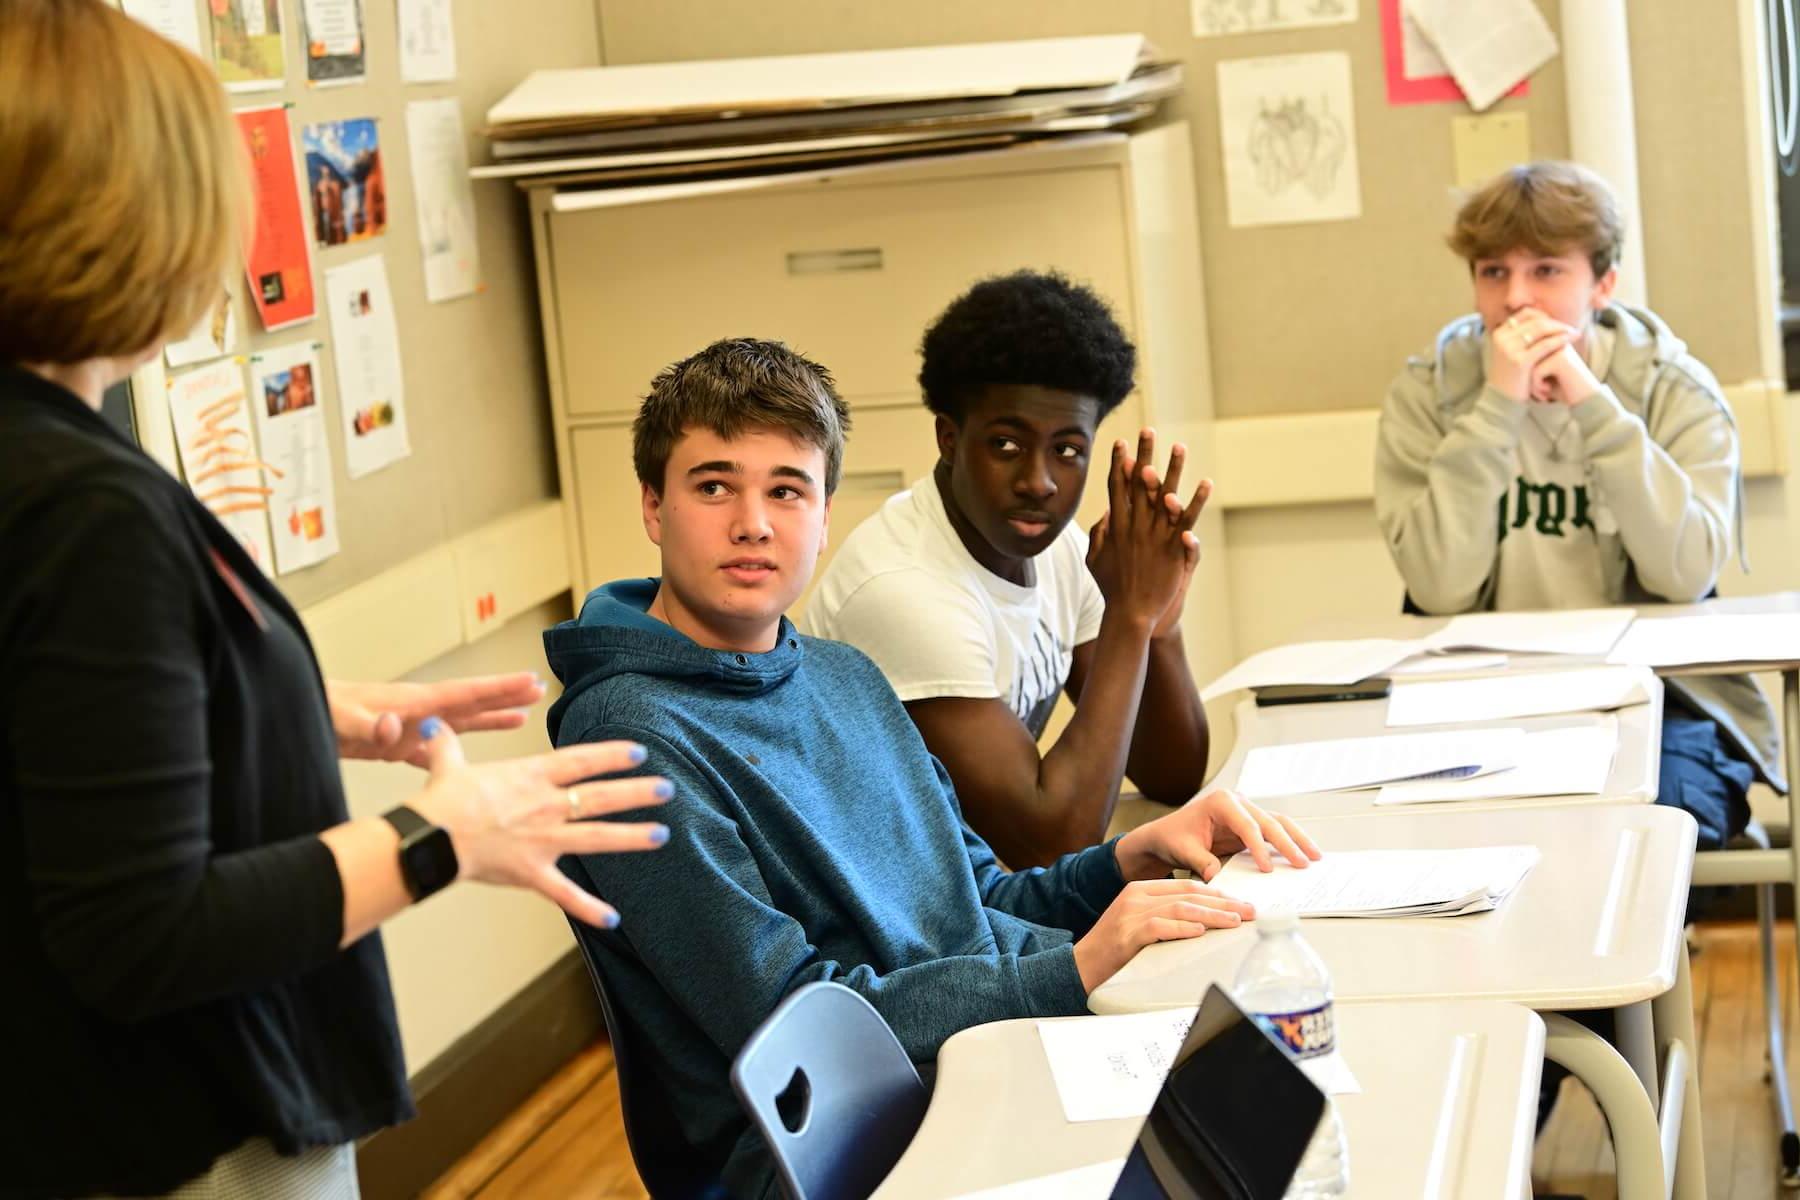 Ethical Culture Fieldston School Upper School students sitting in classroom during the College Symposium